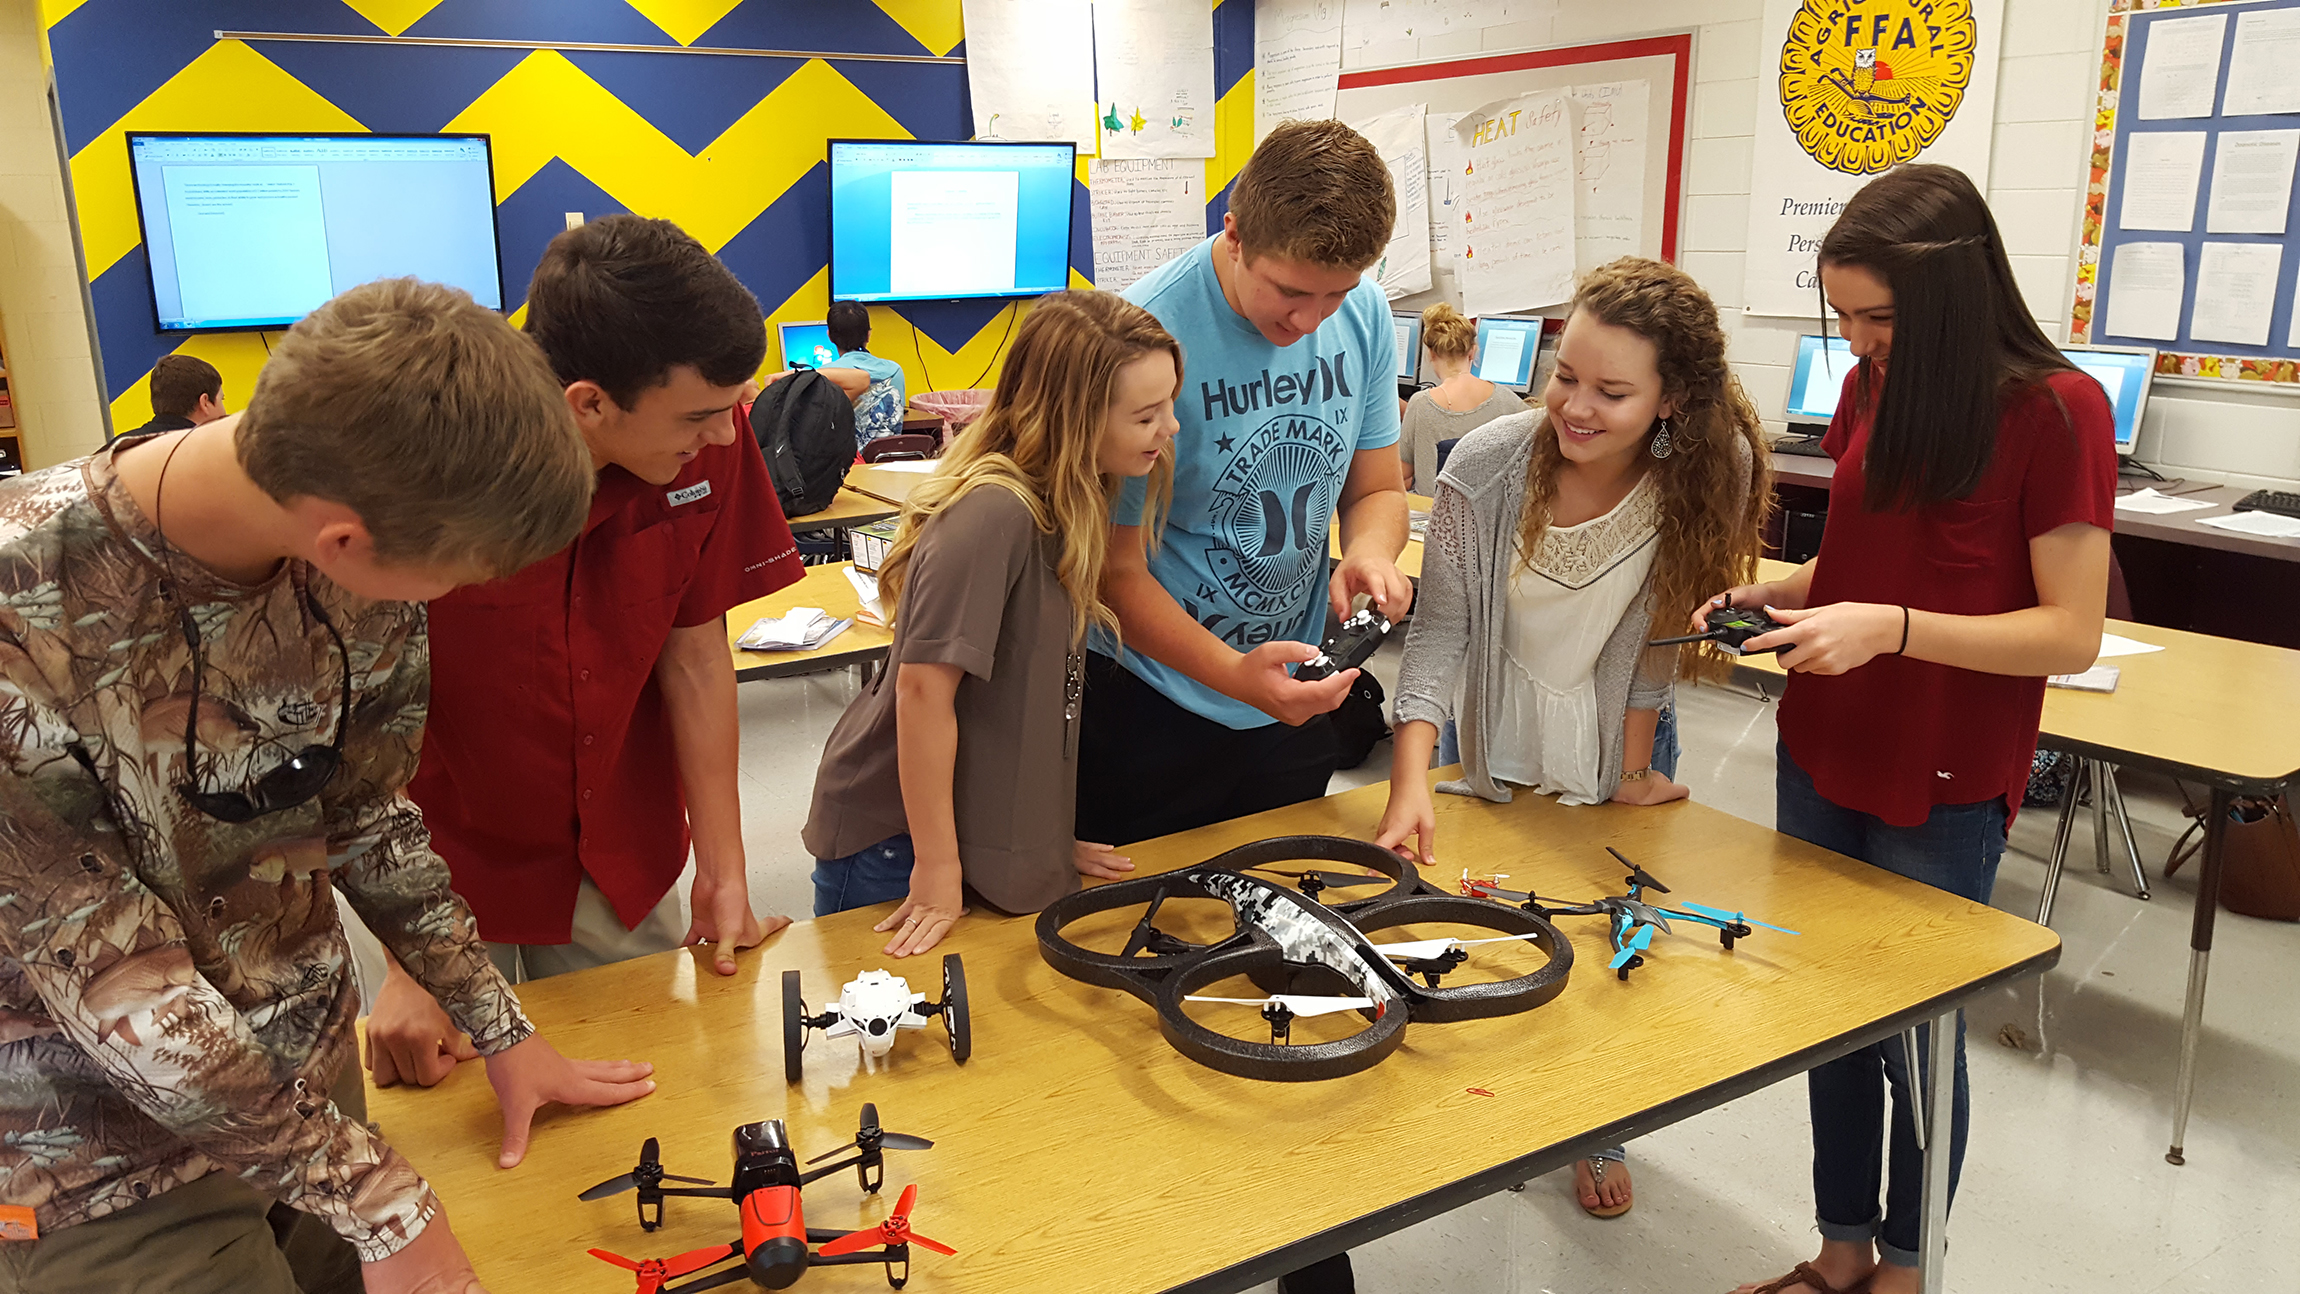 Education takes flight as Florida high schoolers use drones in ag classes | AGDAILY